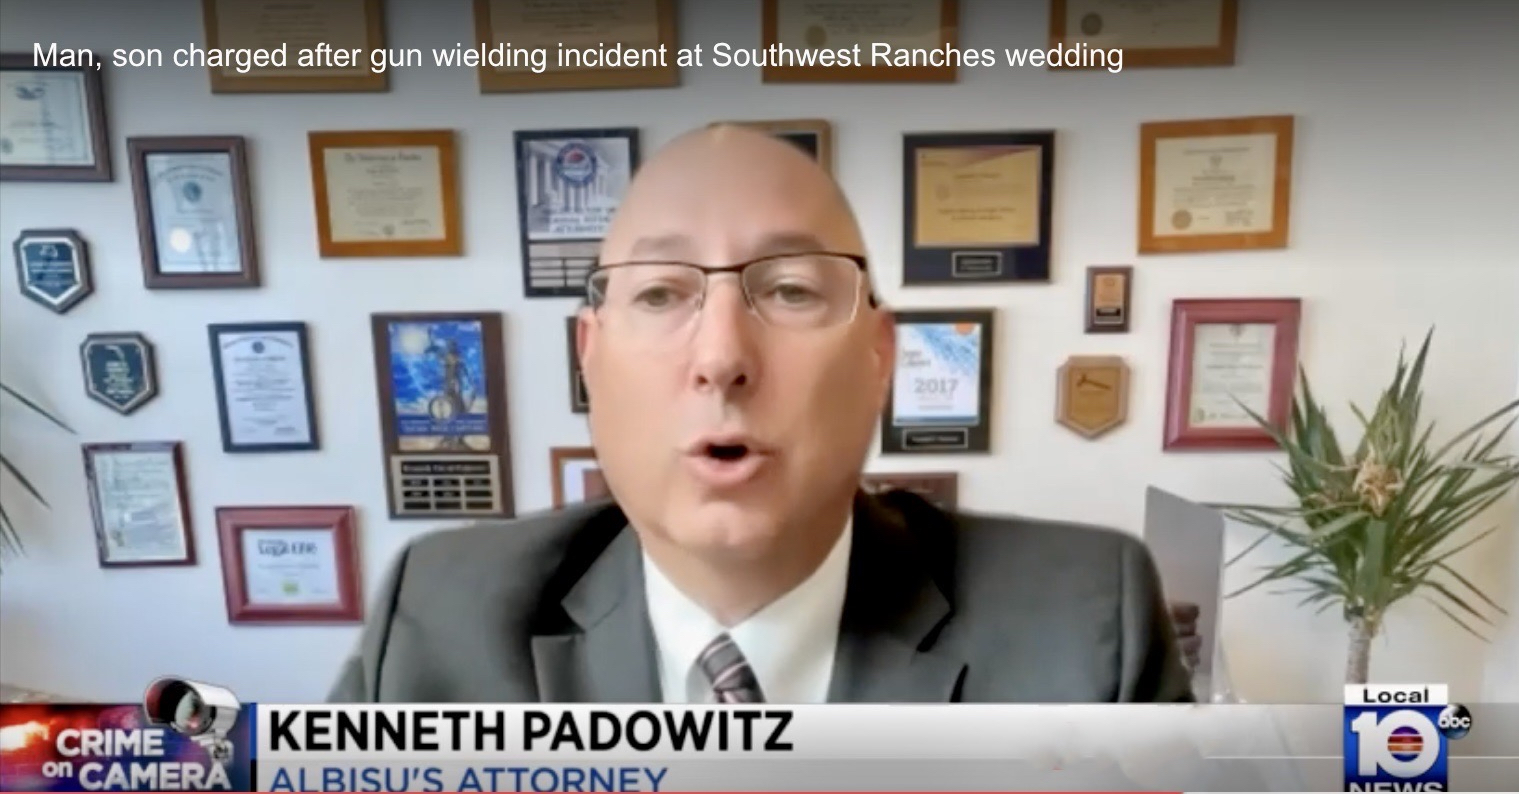 SOUTHWEST RANCHES NURSERY OWNER POINTS GUN AT WEDDING GUESTS, FACES SERIOUS CHARGES